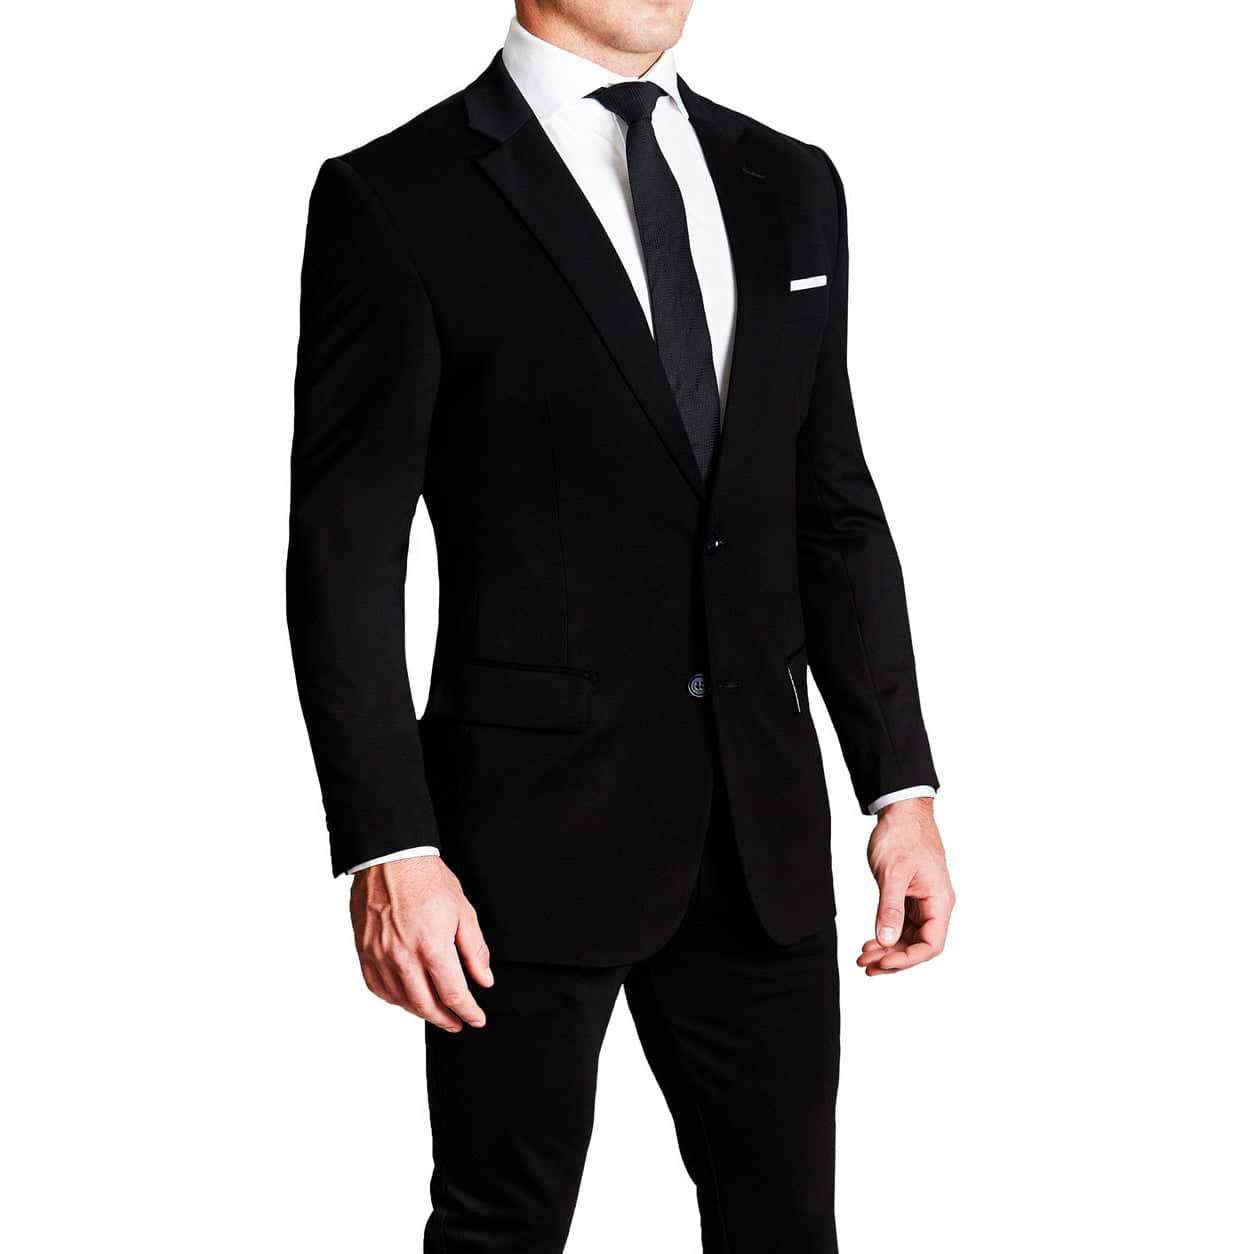 White Shirt And Black Suit Combinations For Men To Style ⋆ Best Fashion  Blog For Men - TheUnstitchd.com